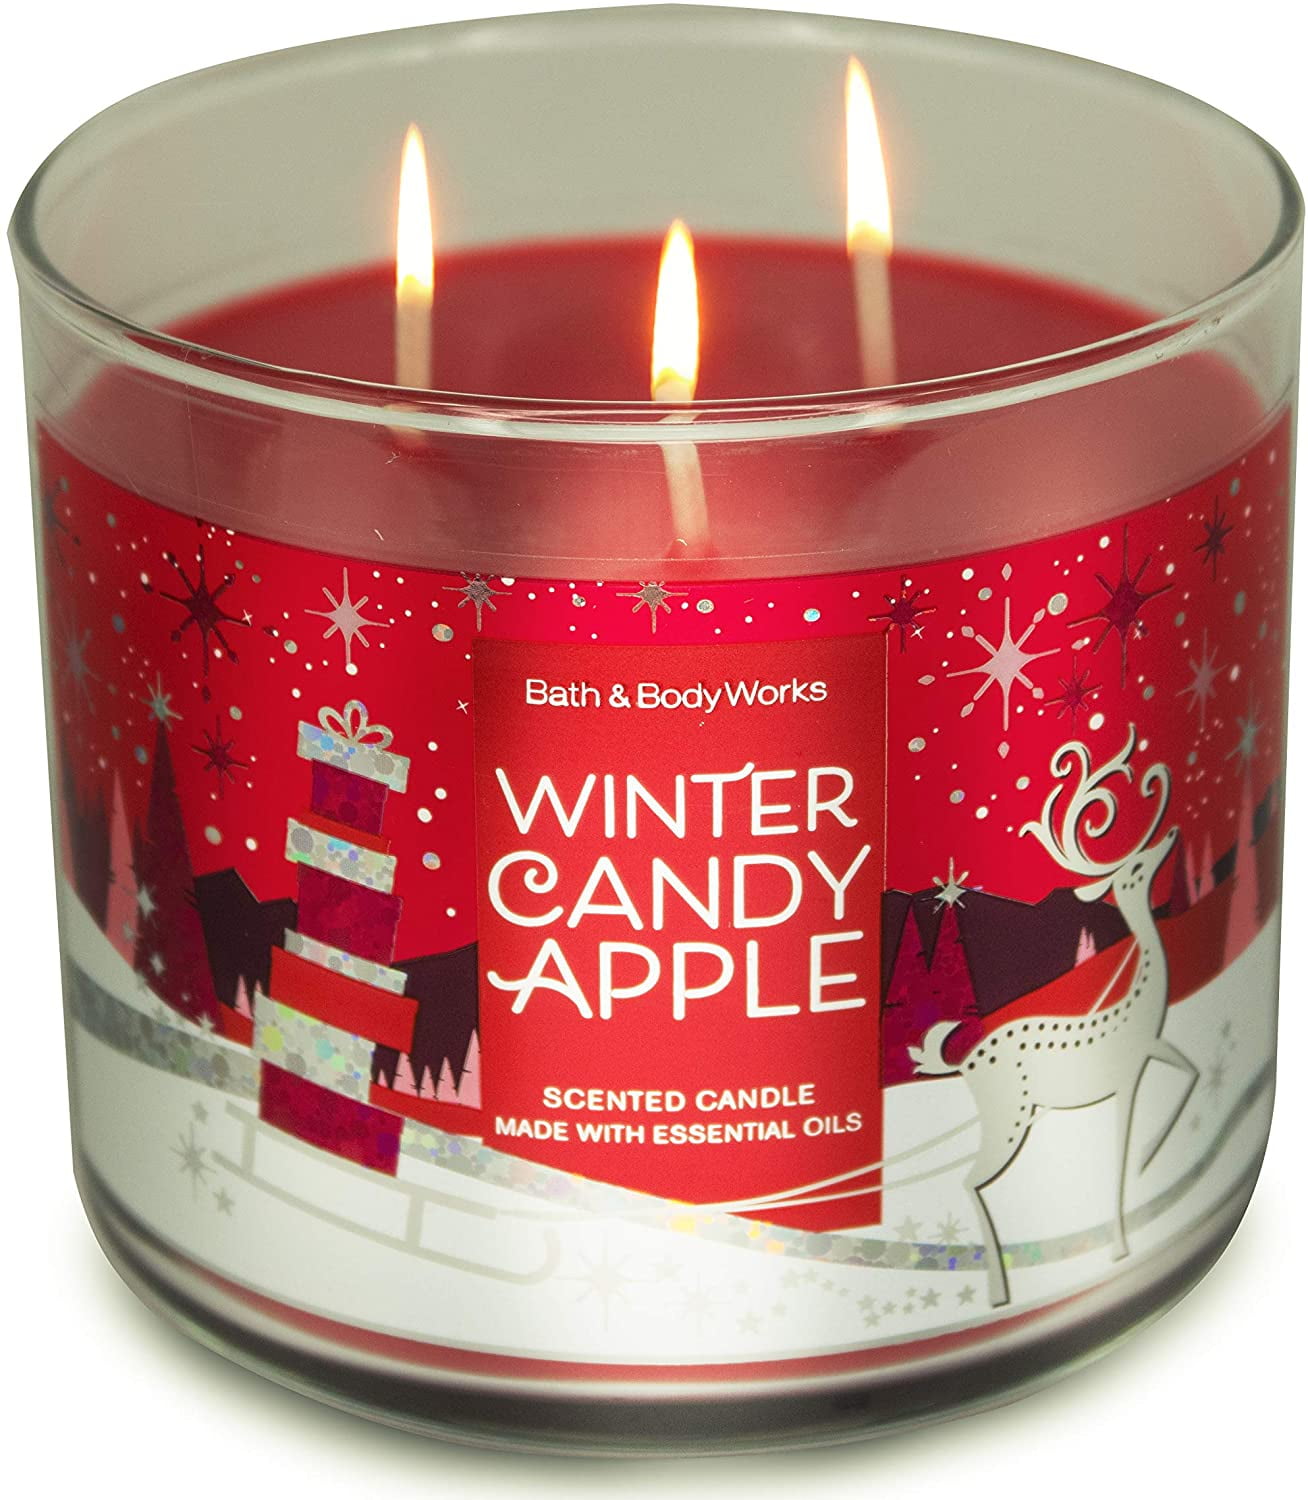 NEW 1 BATH & BODY WORKS WINTER 3-WICK HOME 14.5 OZ LARGE SCENTED FILLED CANDLE 